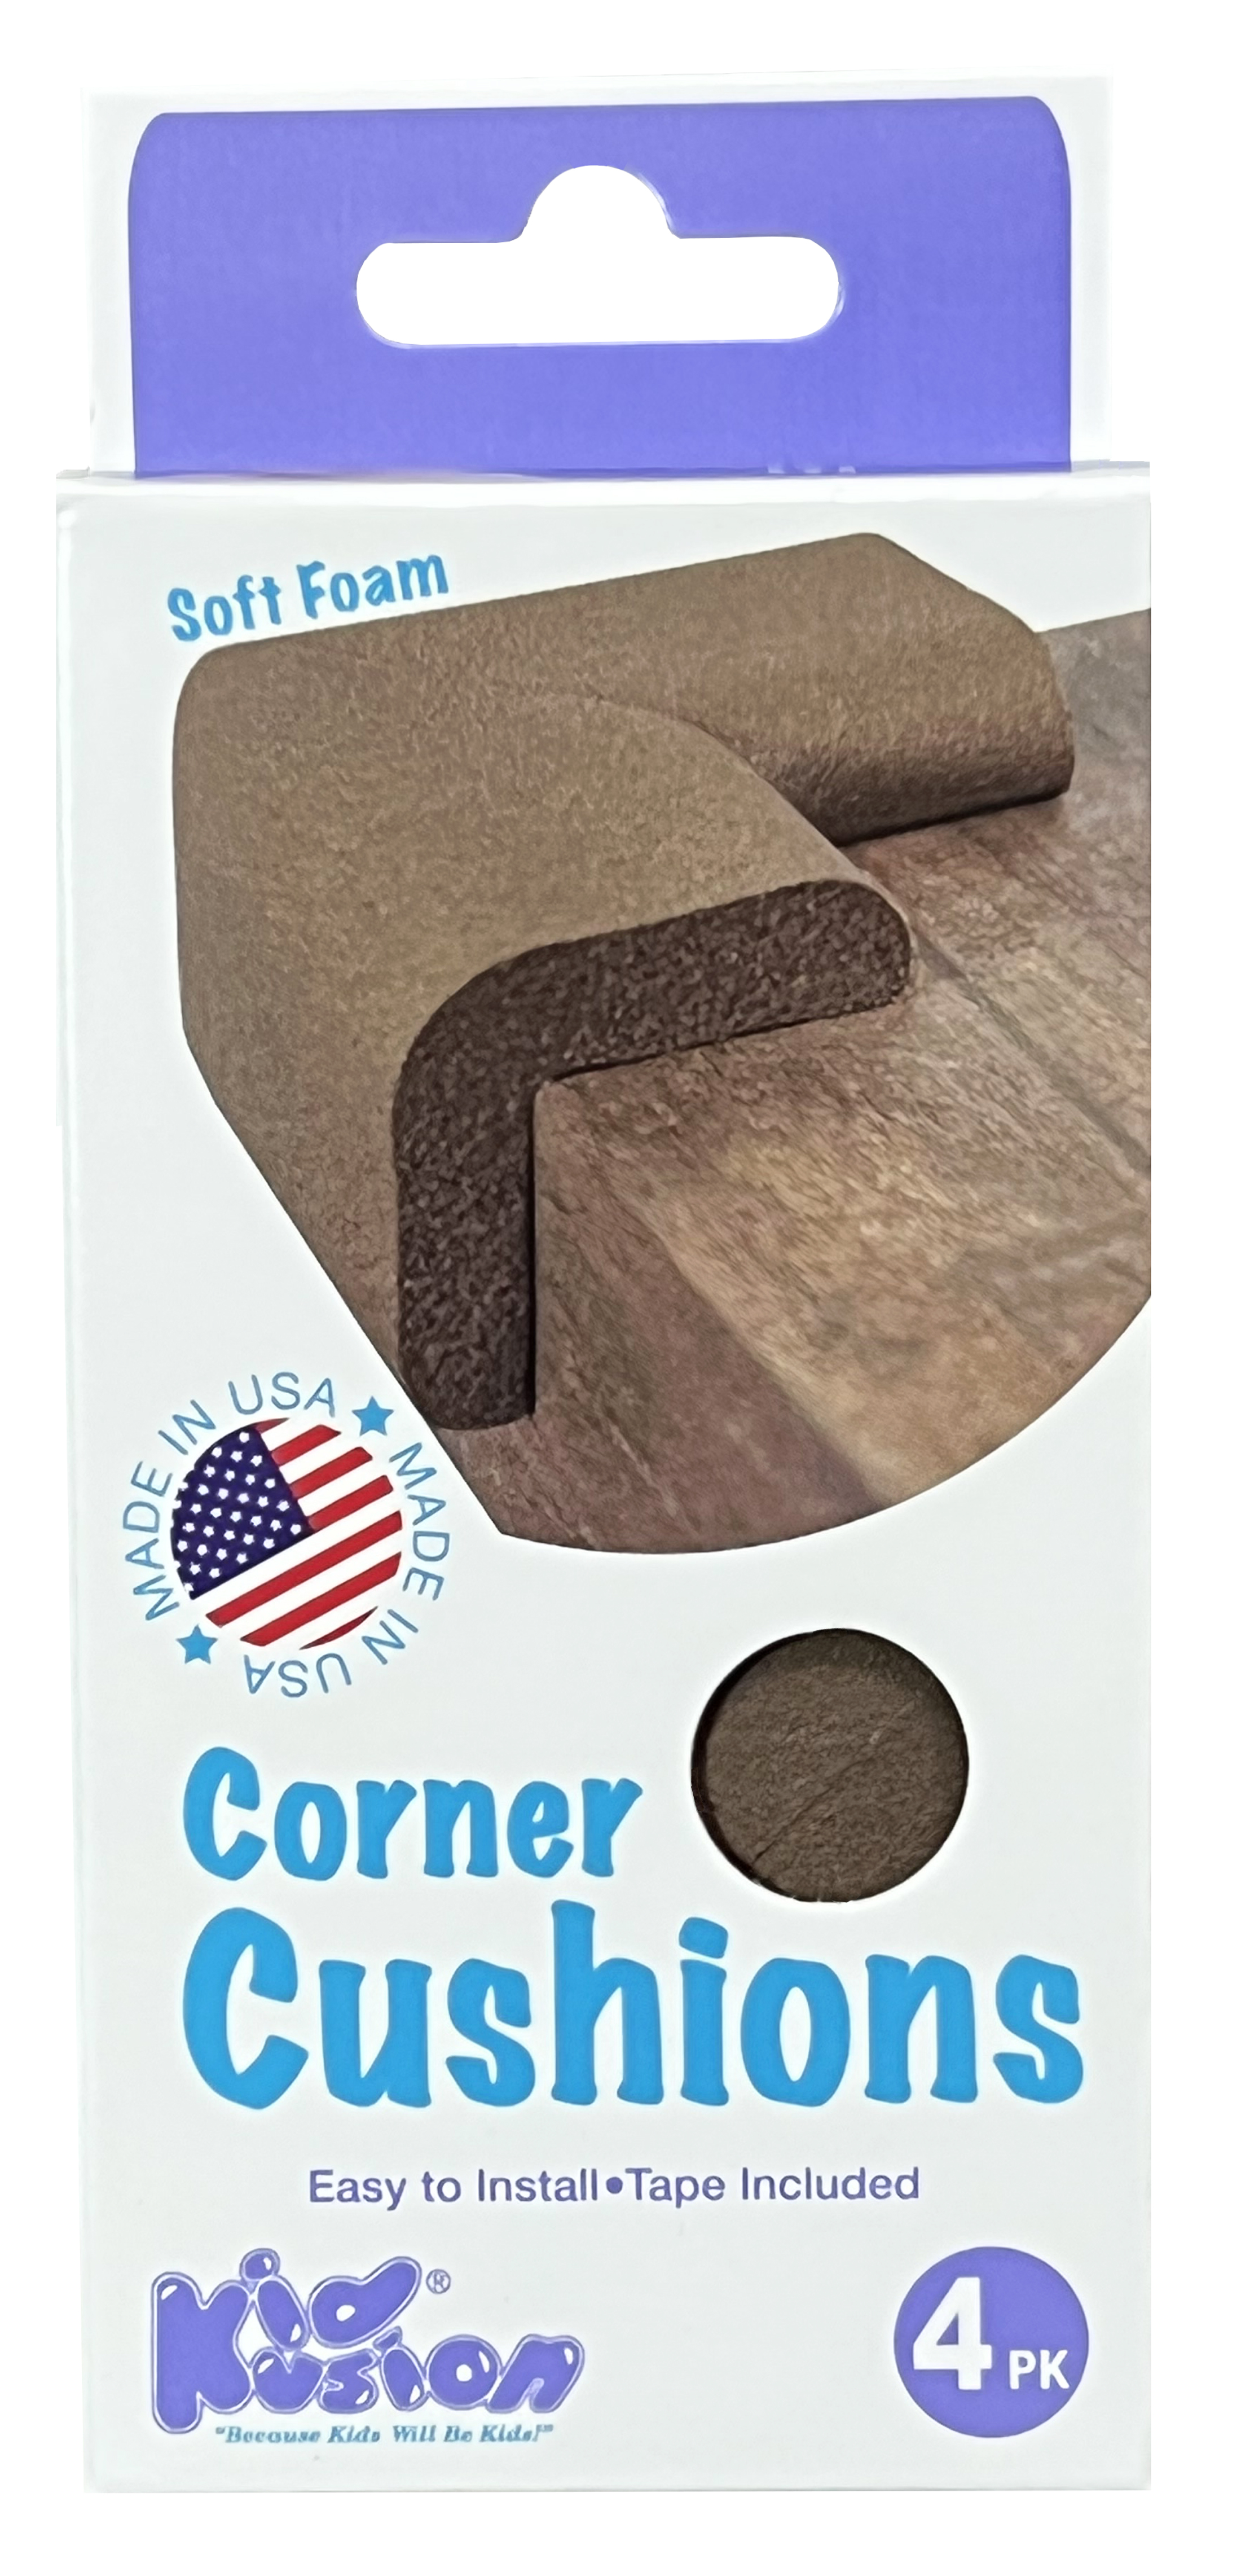 KidKusion Baby Proofing Foam Rubber Corner Cushions, Brown, Corner Protector for Tables, Furniture and more, 4.0 CT - image 5 of 9